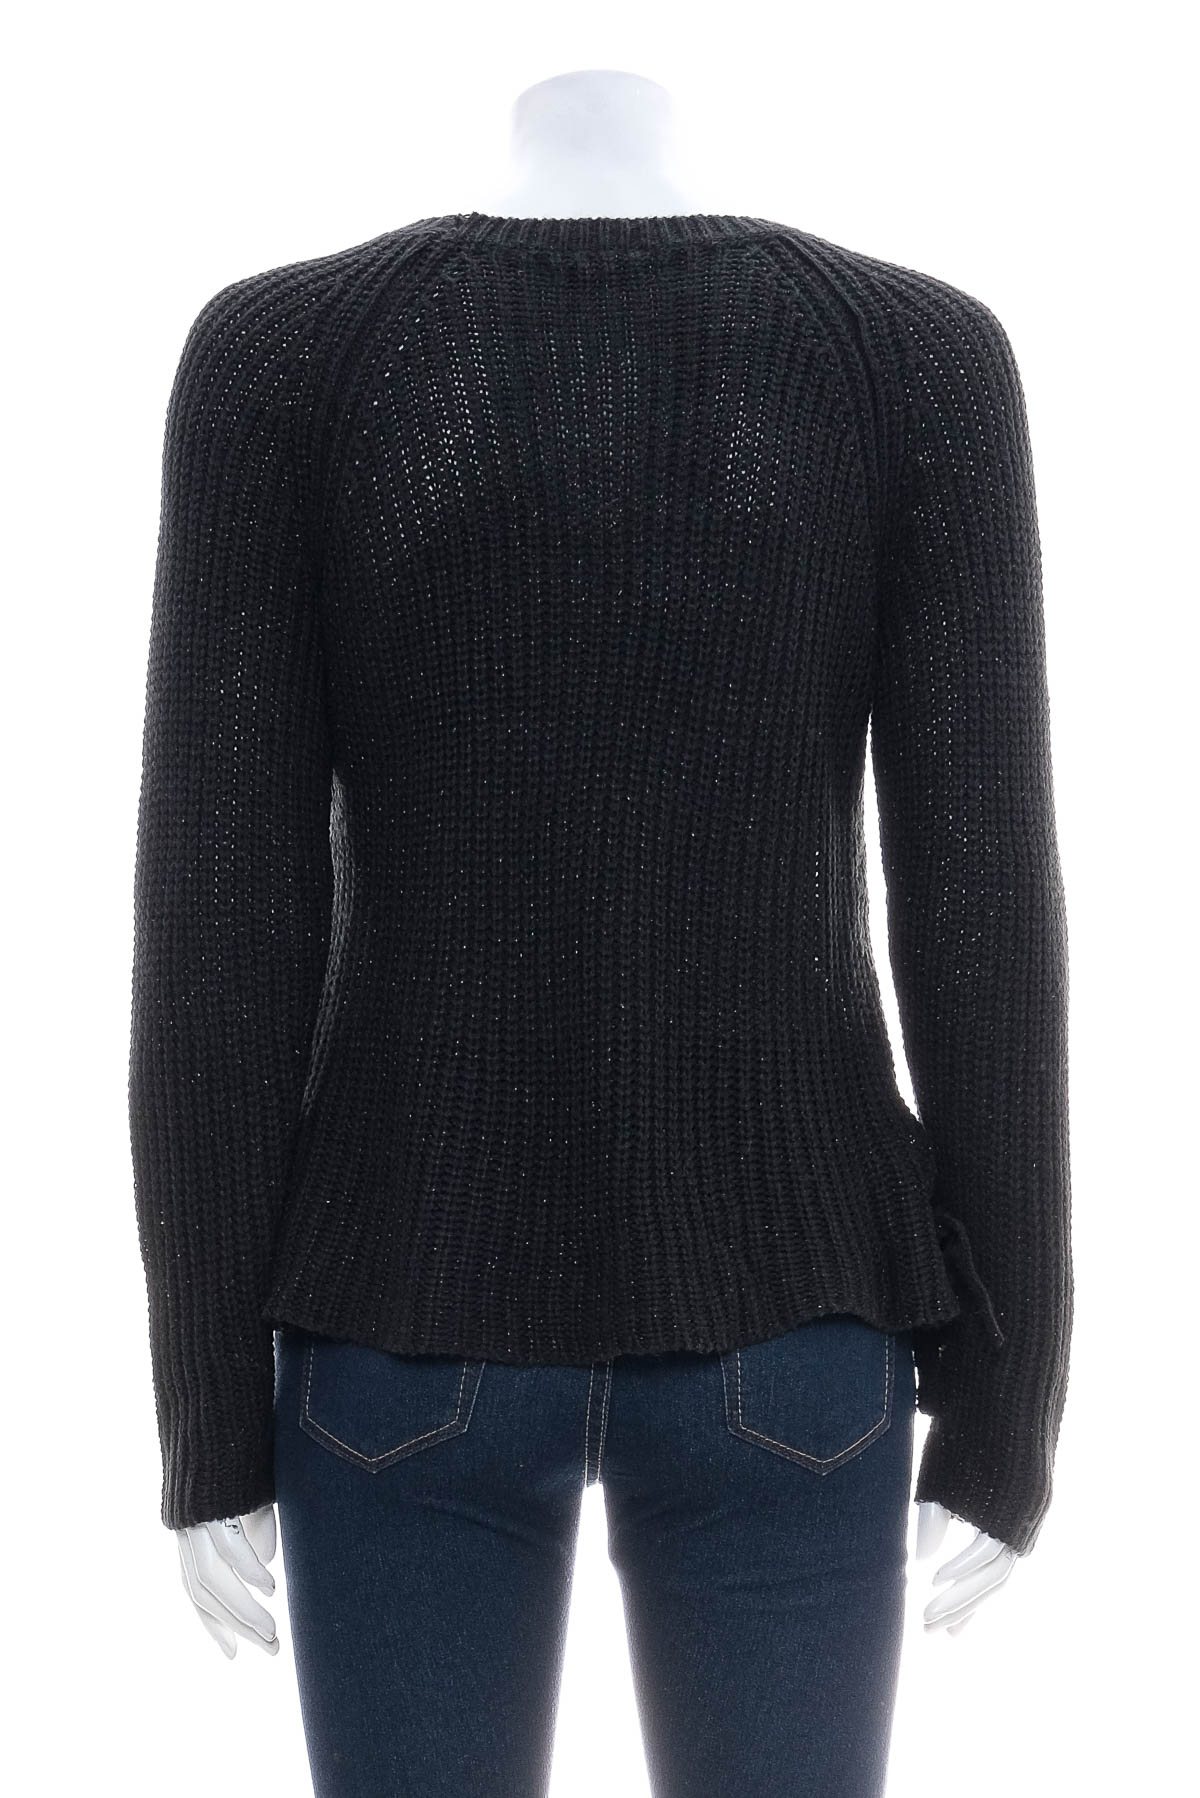 Women's sweater - Maurices - 1